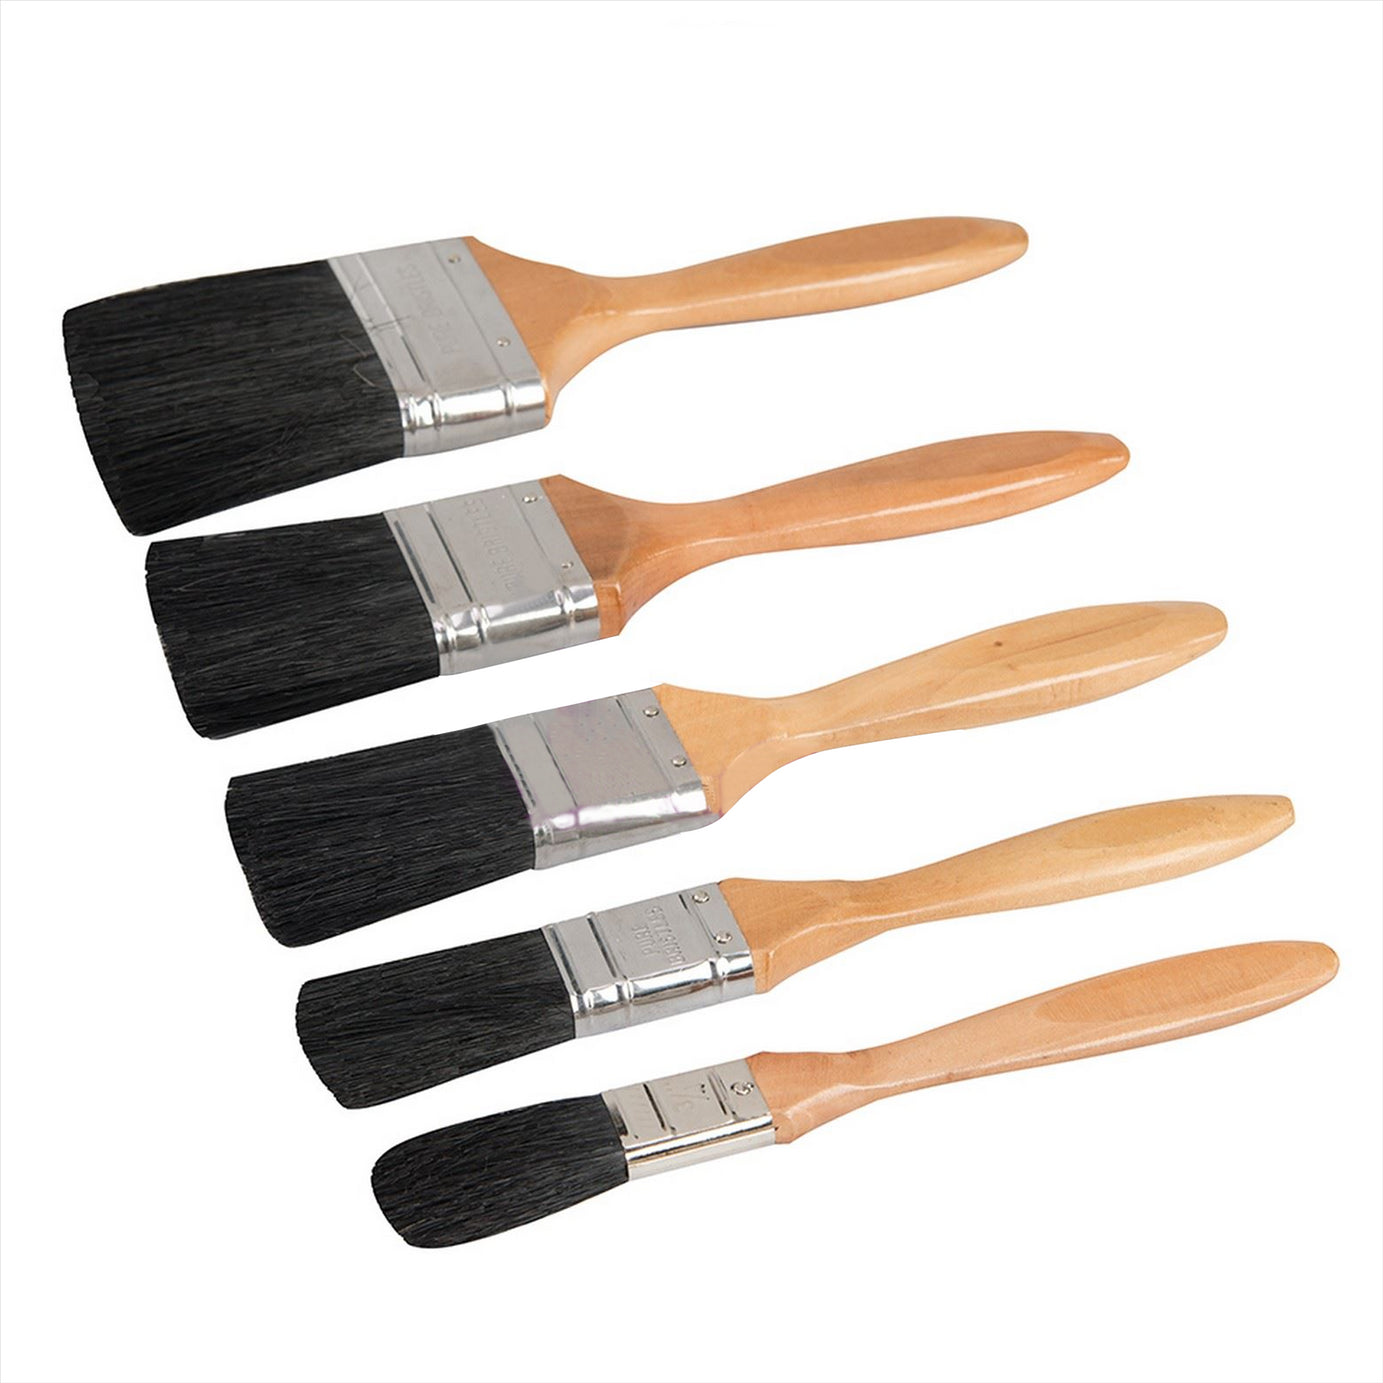 5Pce Premium Thick Pure Brush Set For Oil,Water Based Coatings Painting DIY